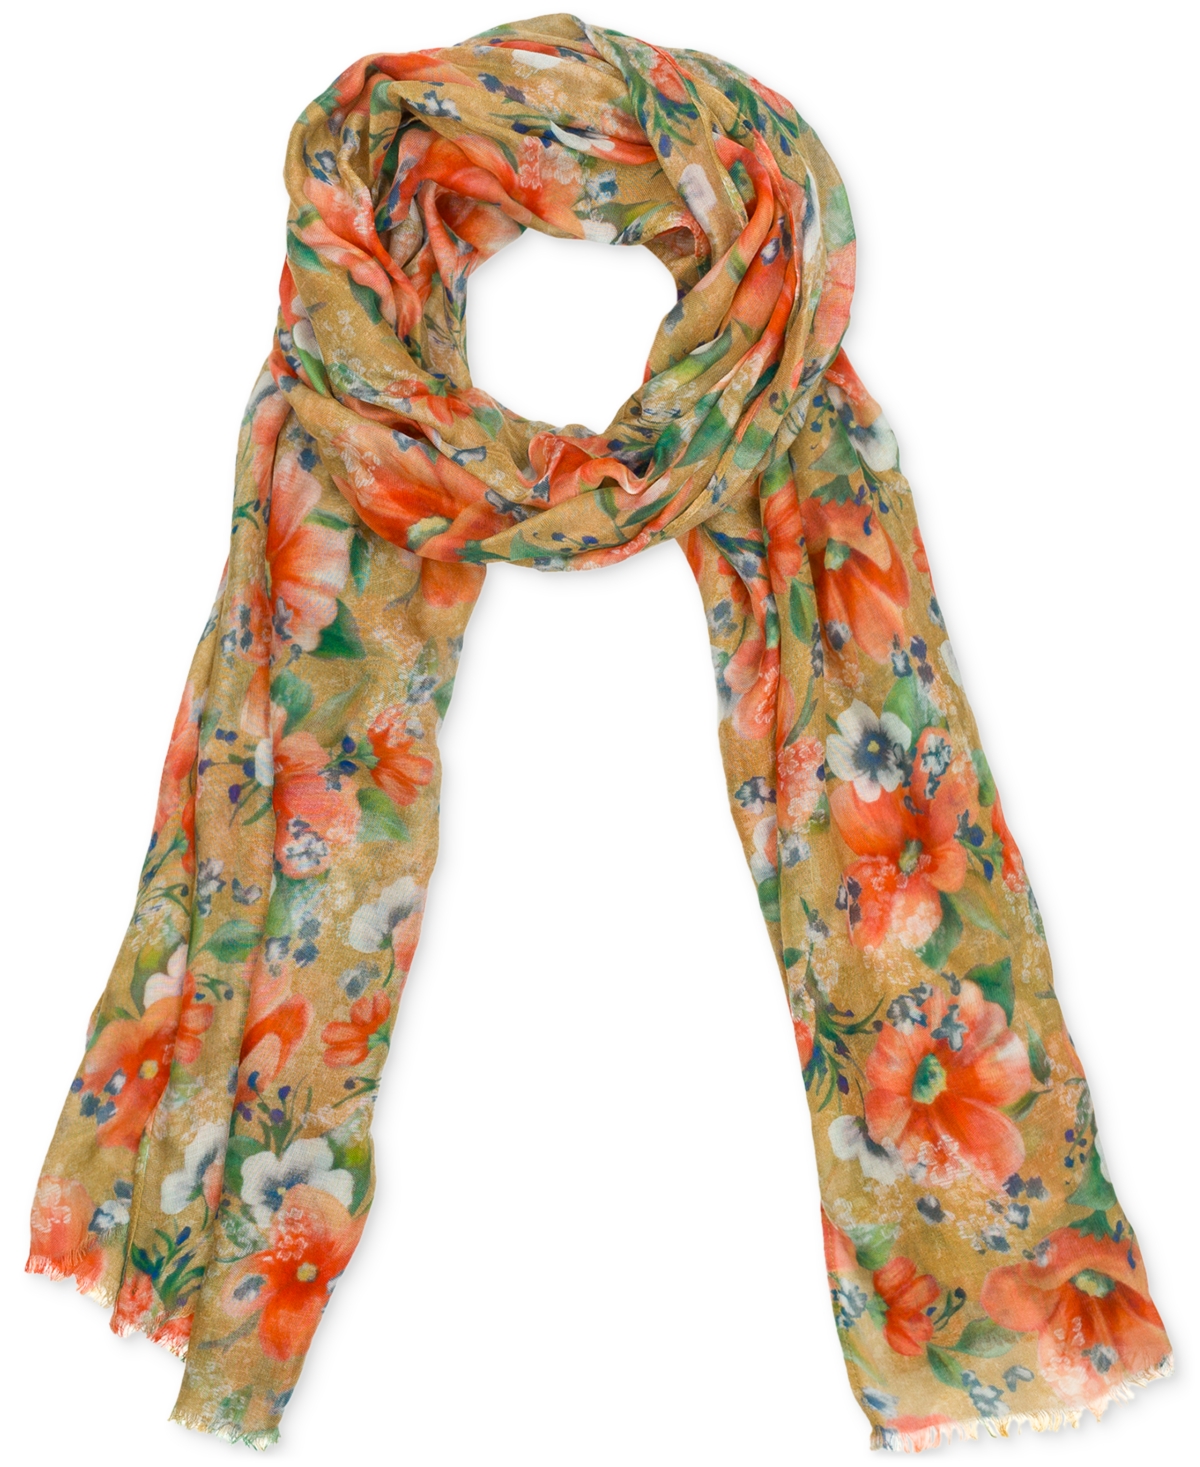 Patricia Nash Vintage Print Scarf In Apricot Blossoms